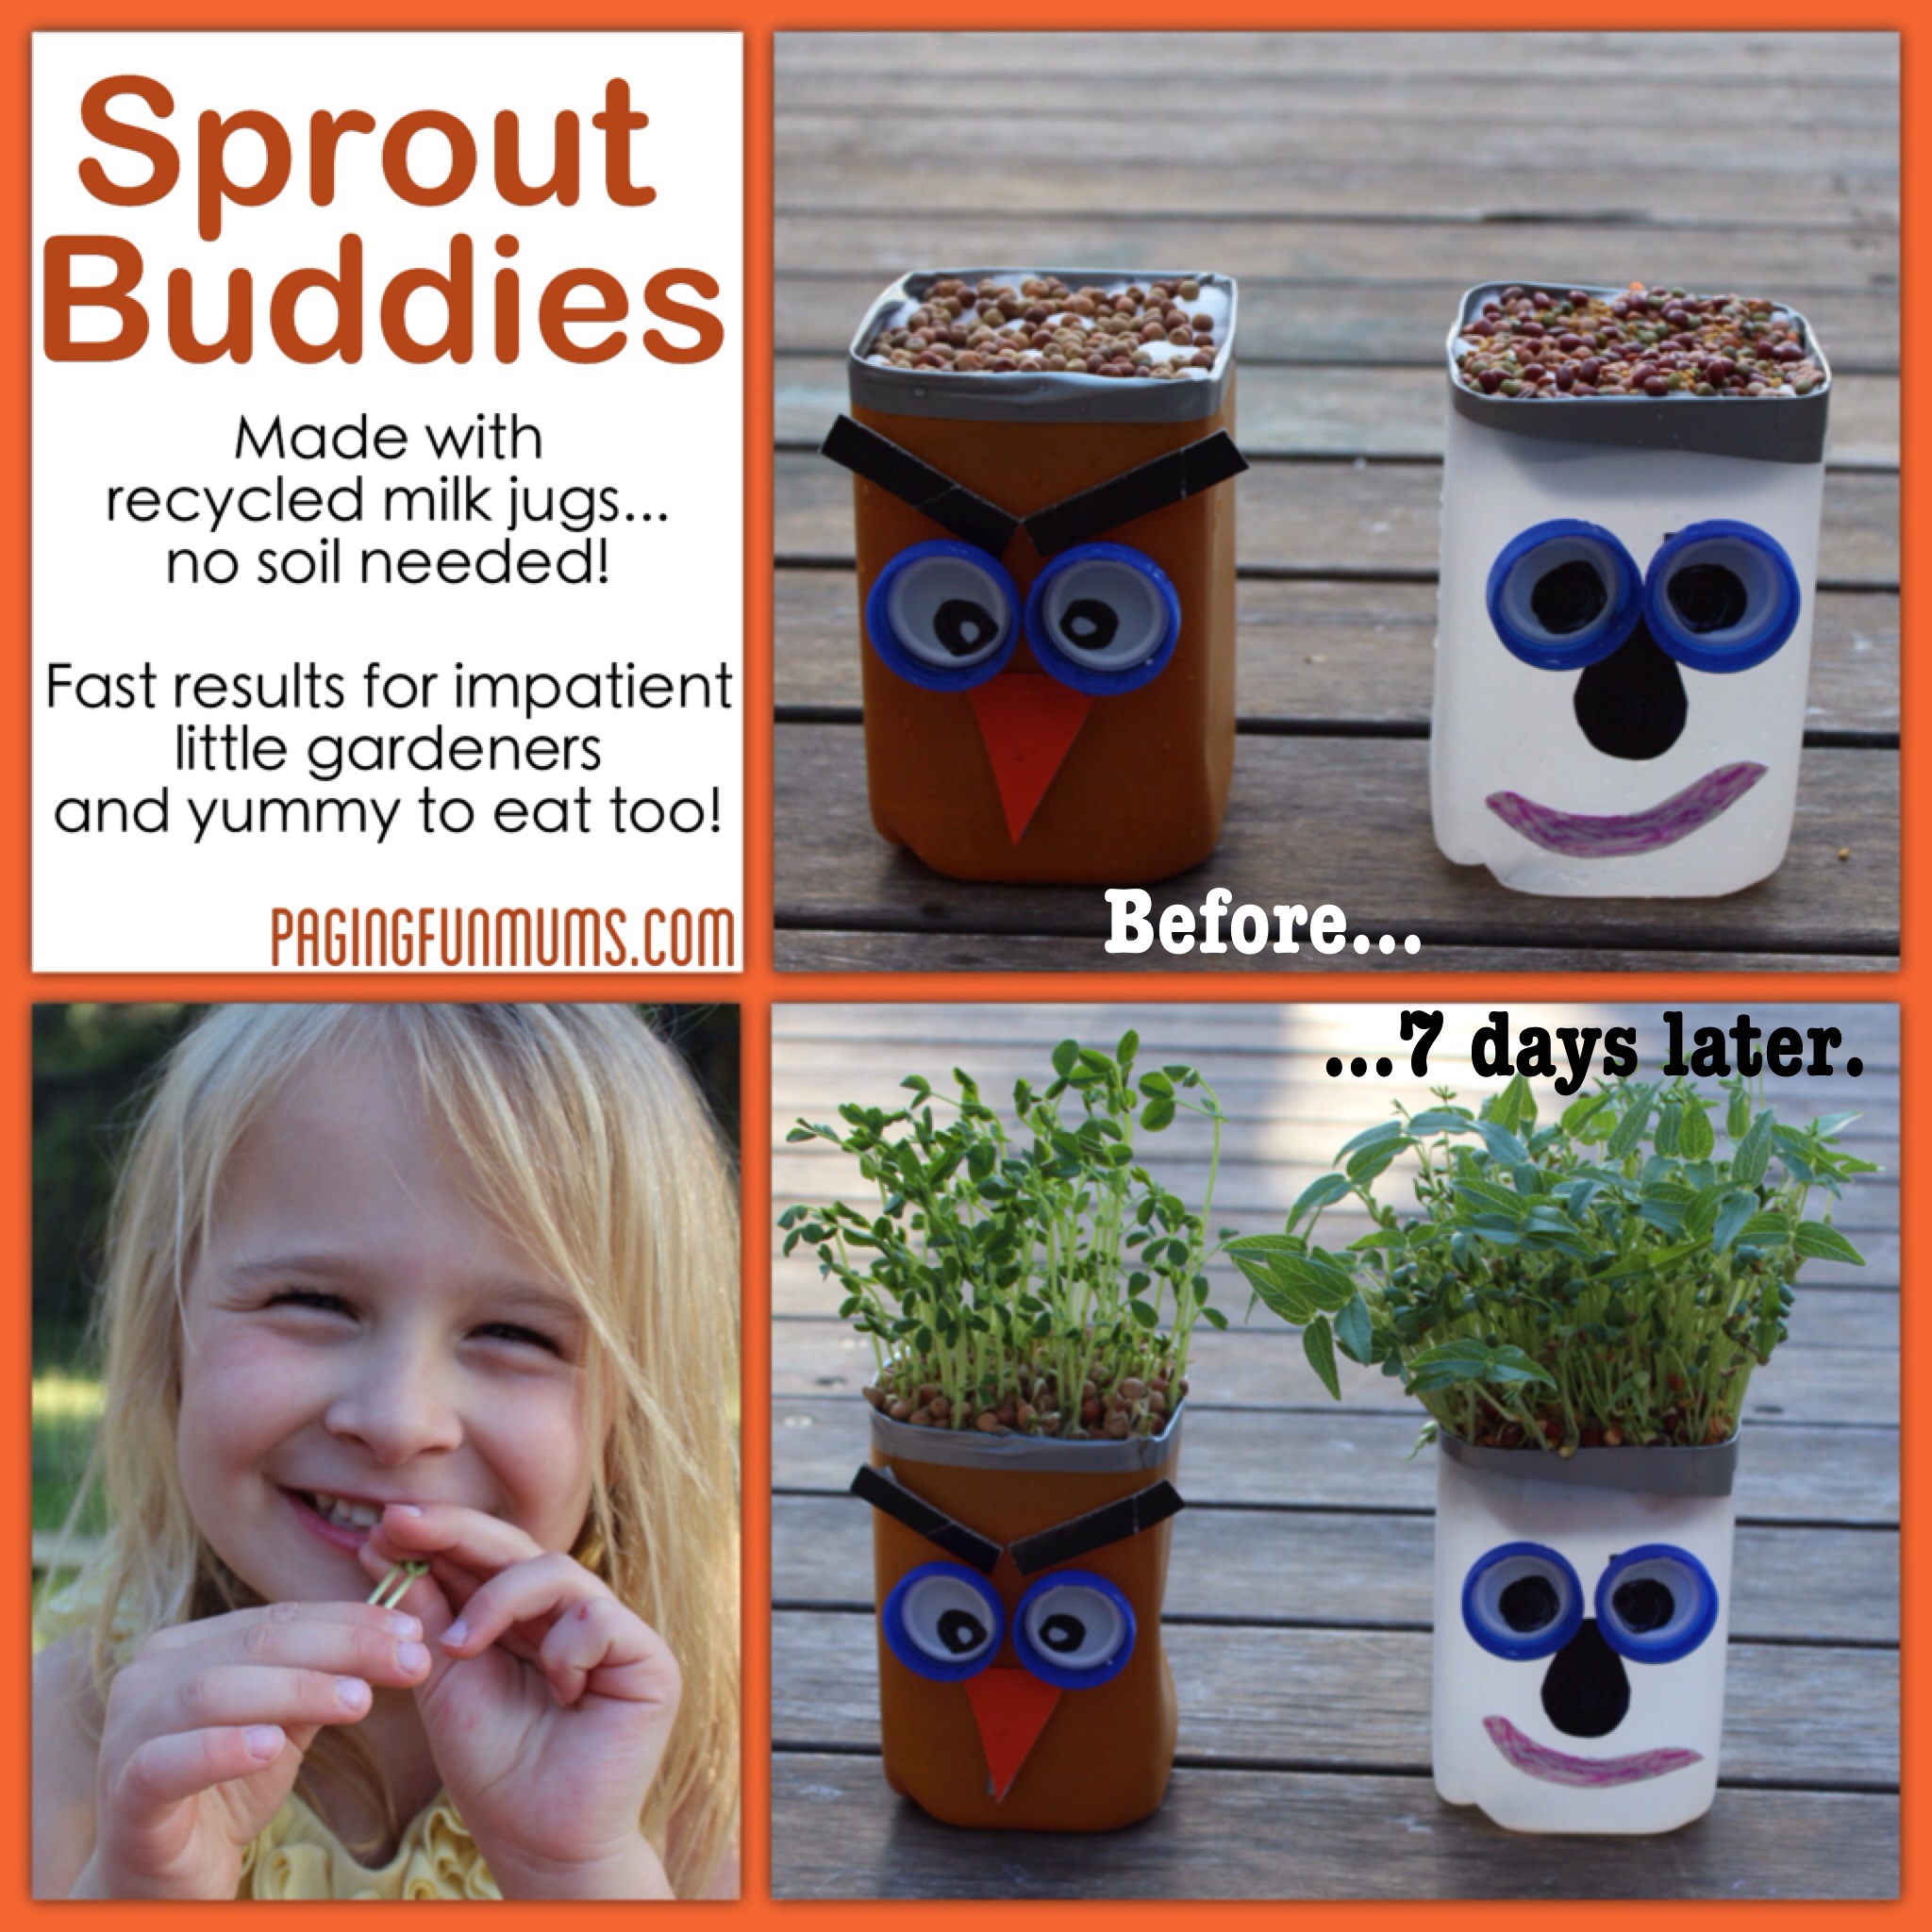 Spout Buddies - Using recycled Milk Jugs